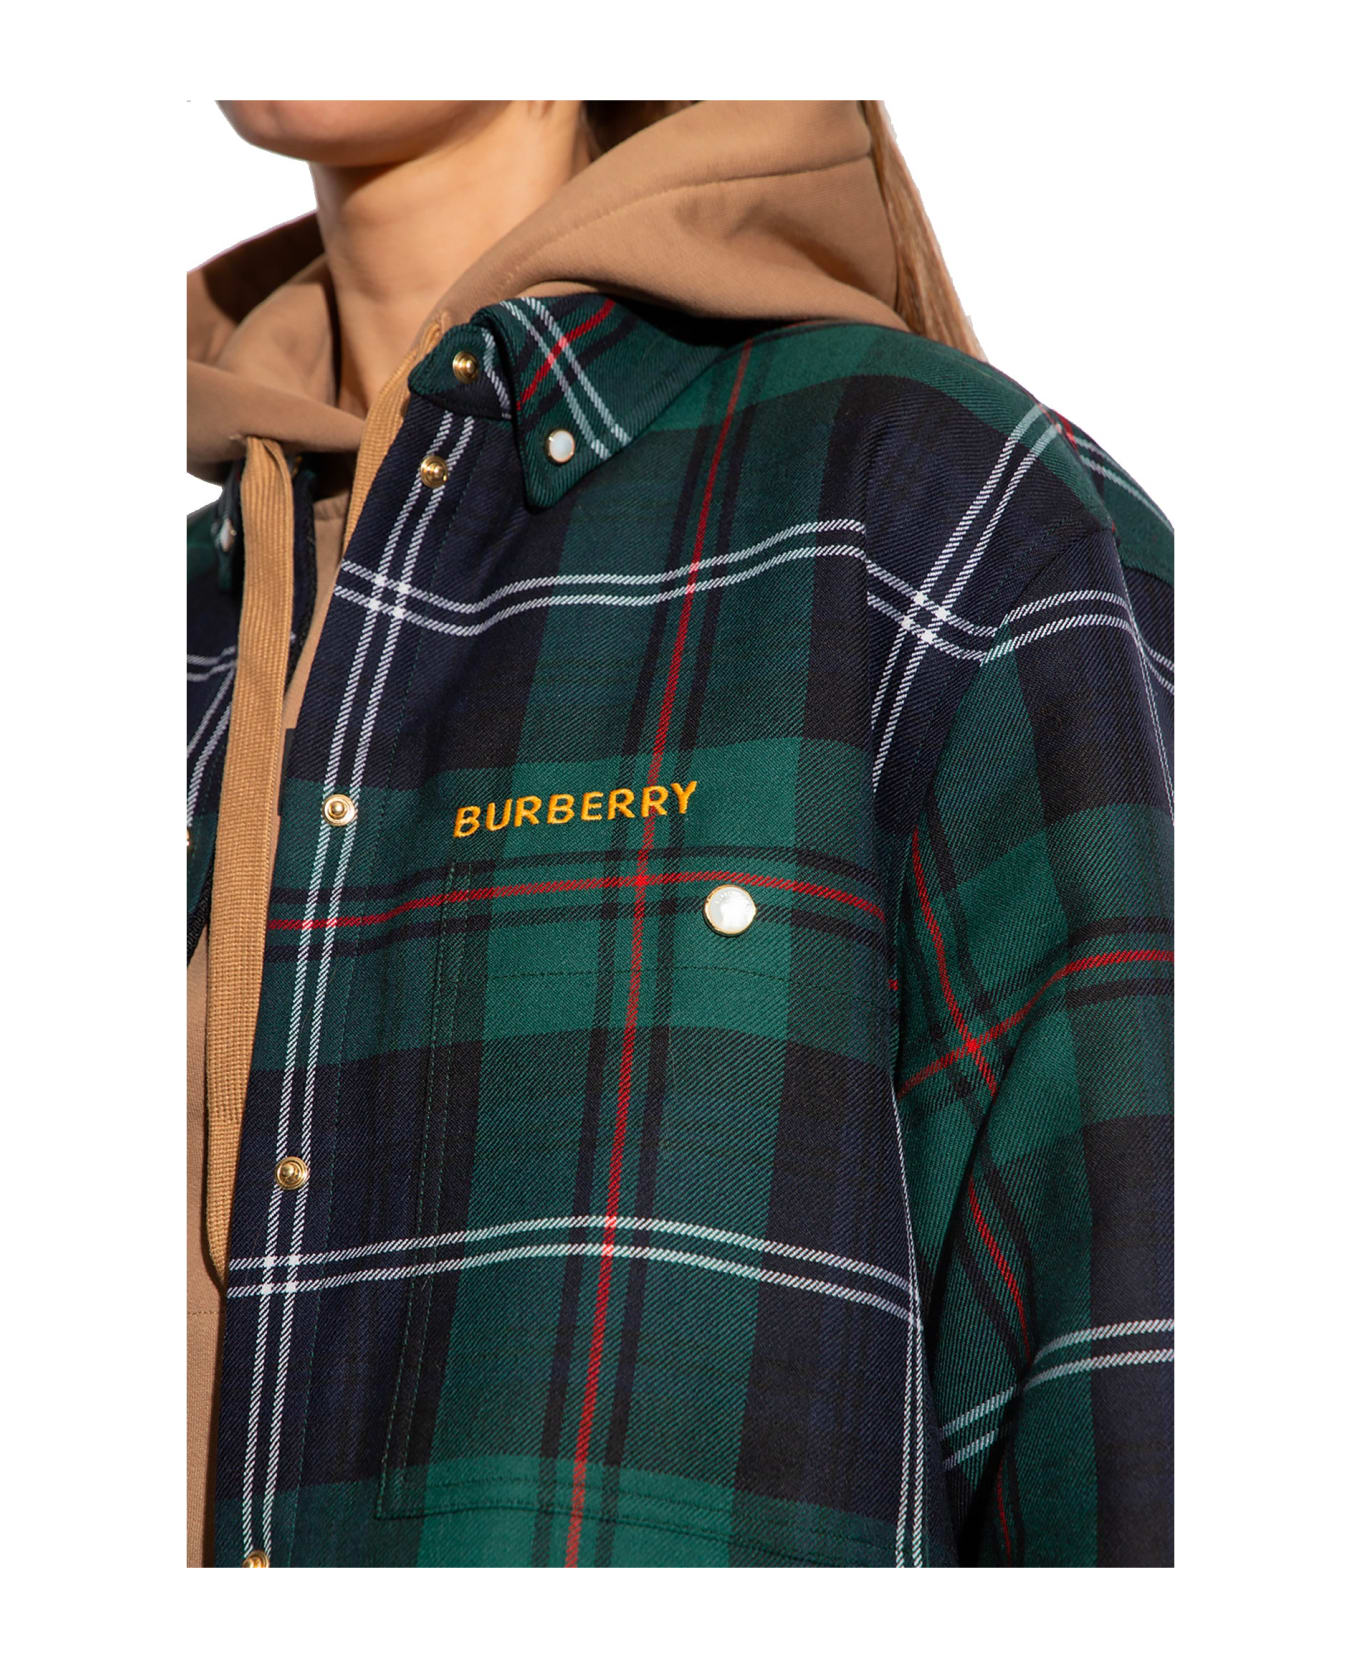 Burberry Two-piece Jacket - Green